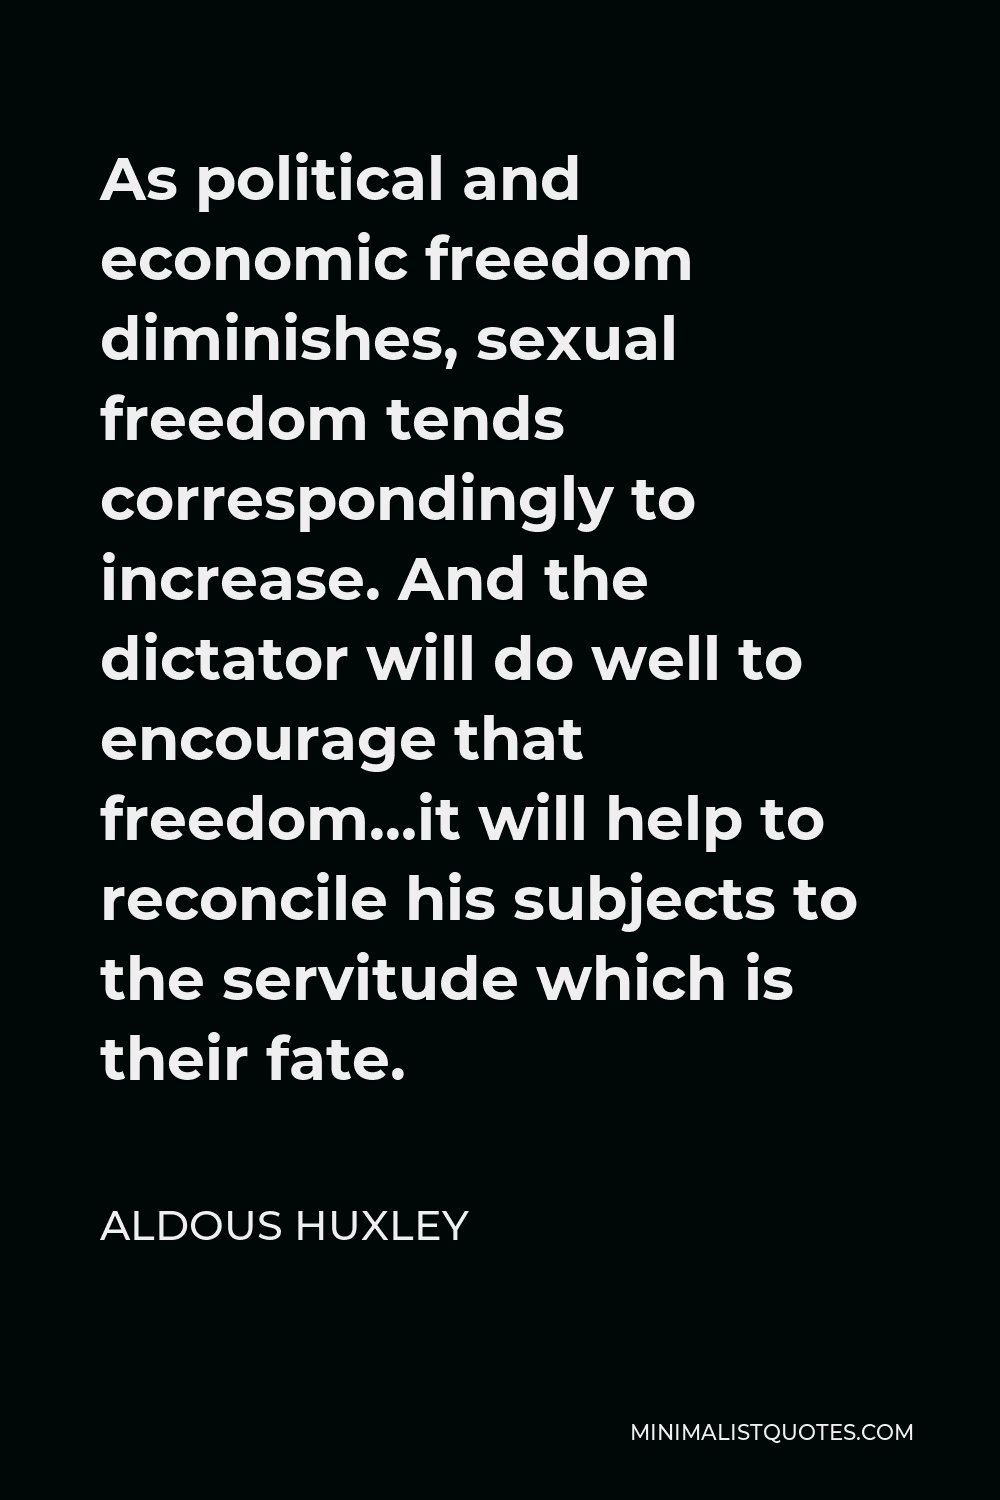 Aldous Huxley Quote - As political and economic freedom diminishes, sexual freedom tends correspondingly to increase. And the dictator will do well to encourage that freedom…it will help to reconcile his subjects to the servitude which is their fate.